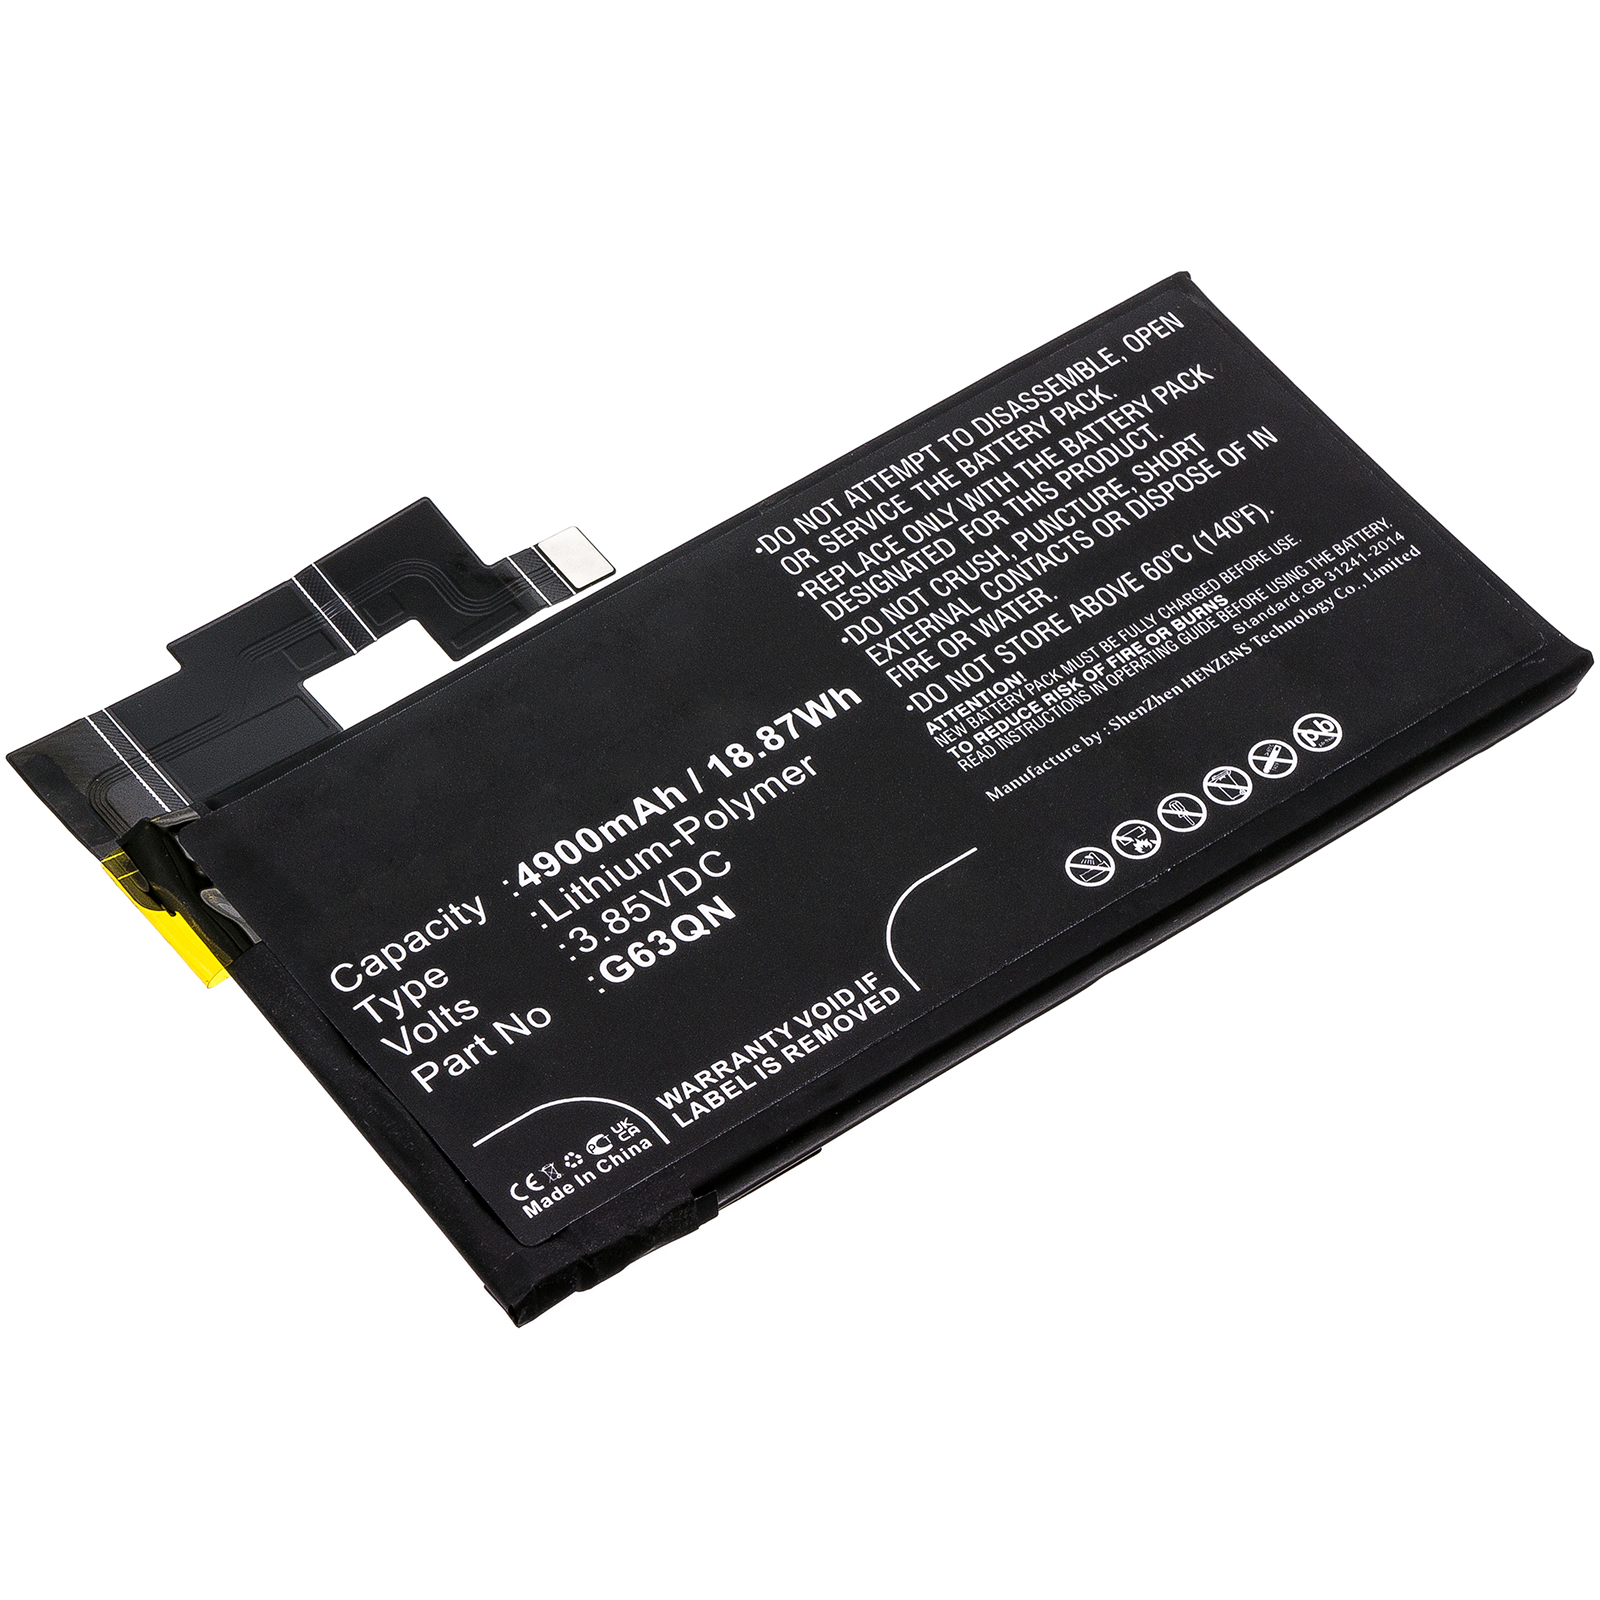 Synergy Digital Cell Phone Battery, Compatible with Google G63QN Cell Phone Battery (Li-Pol, 3.85V, 4900mAh)